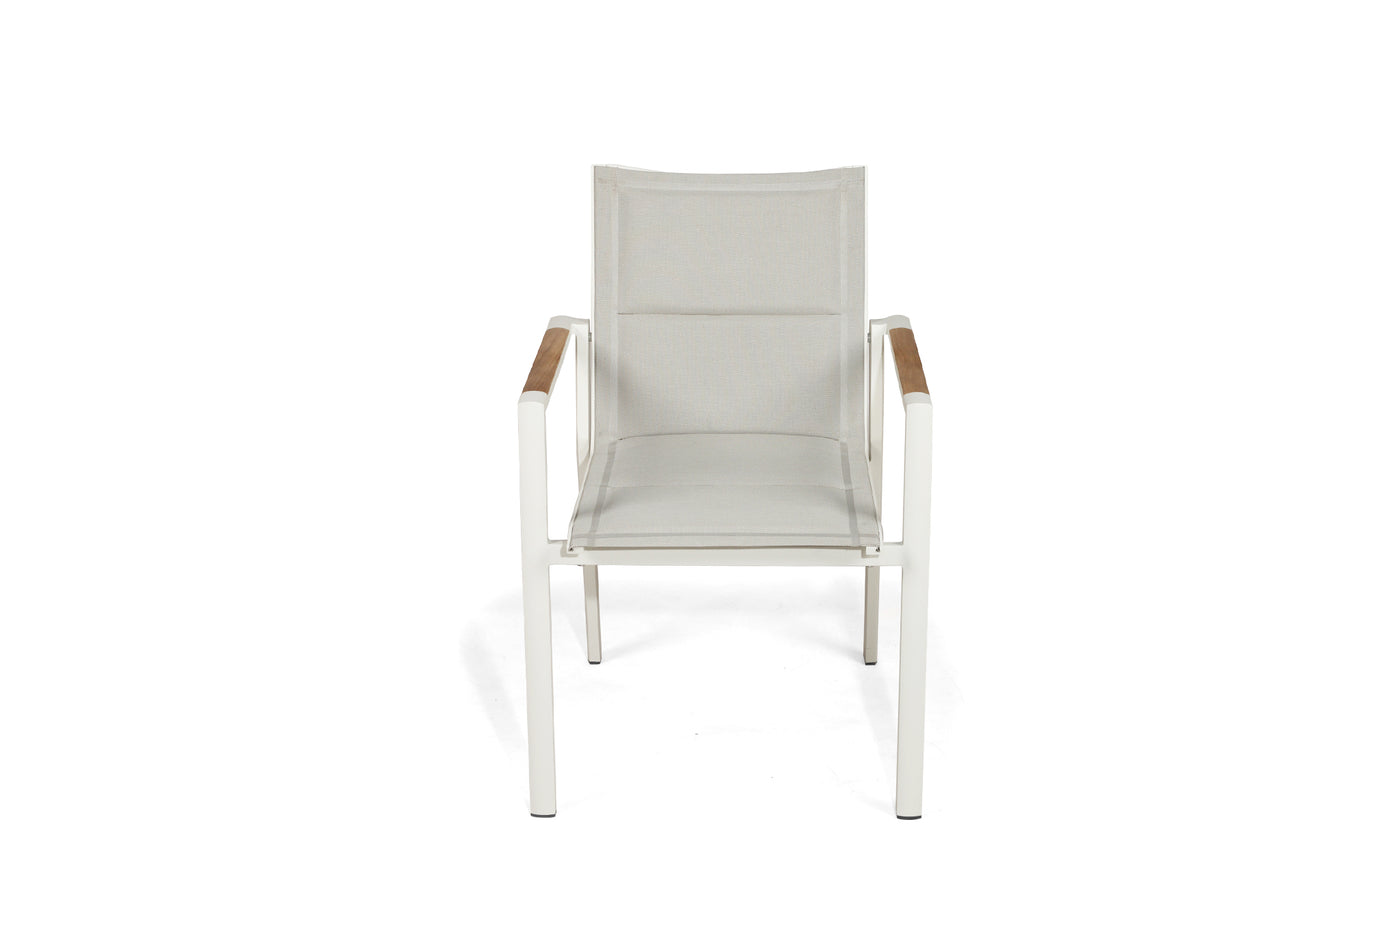 Deniro Stackable Outdoor Dining Chair -White - Set of 4